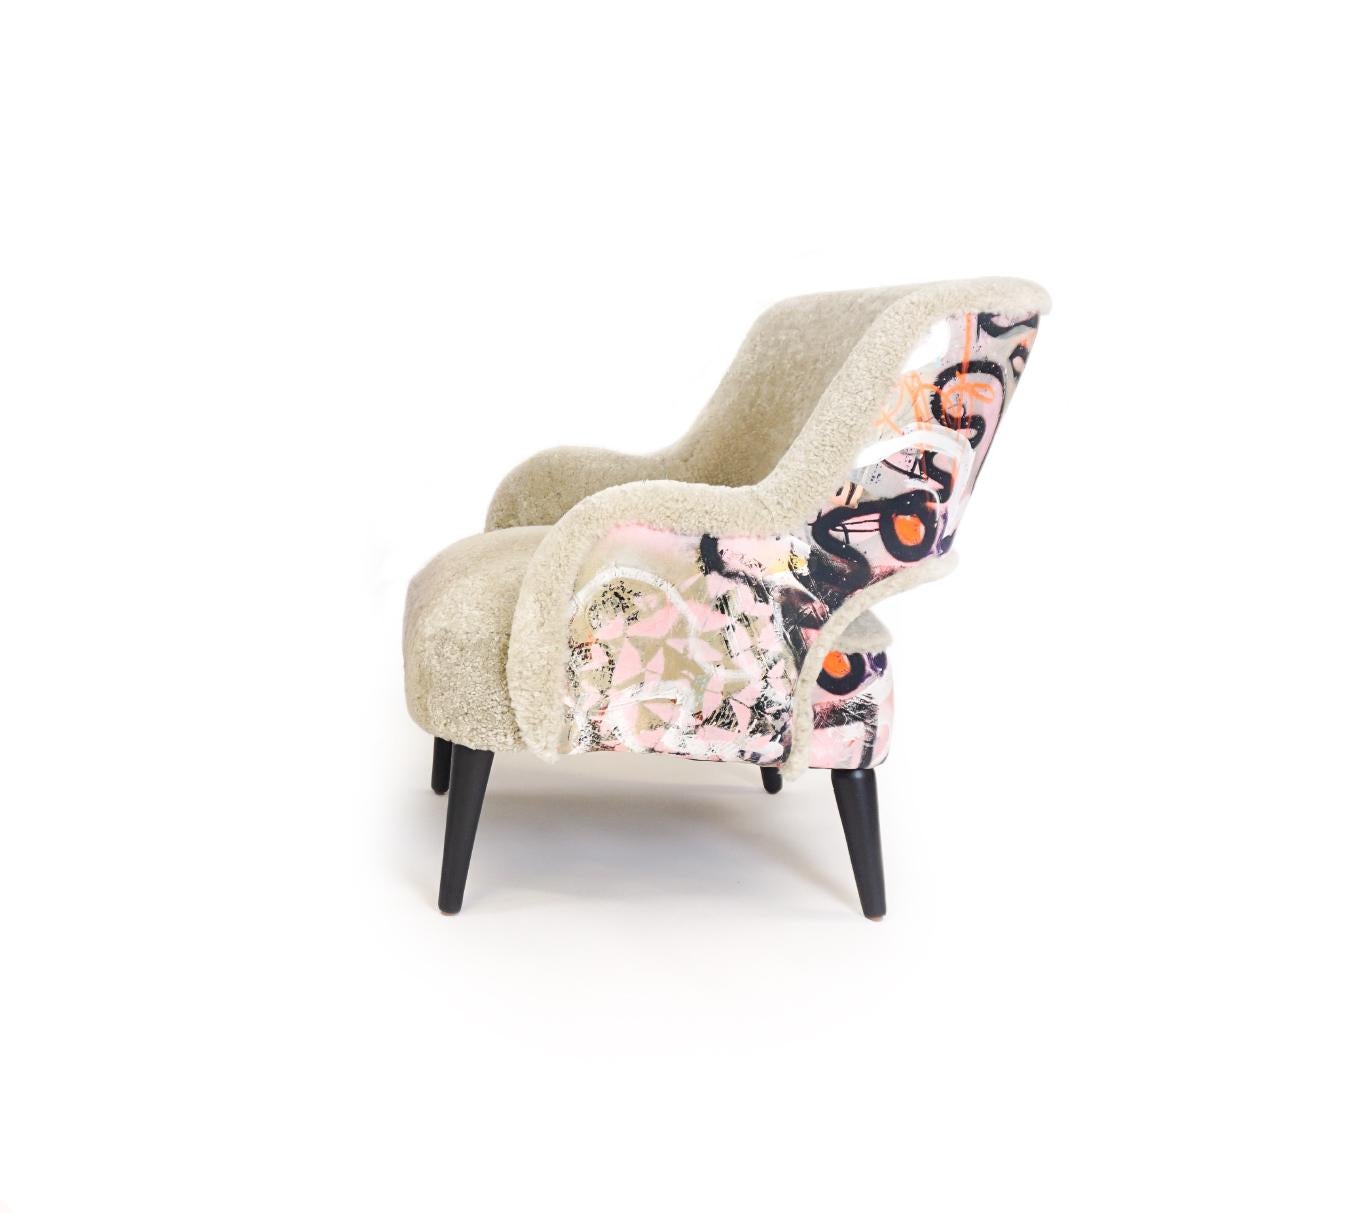 About this piece
Price is per one chair in fabric shown. This customizable club chair features an open back, tight seat and back cushions and matte lacquered round turned legs. The ottoman is sold separately. Our upholstered frames are built with